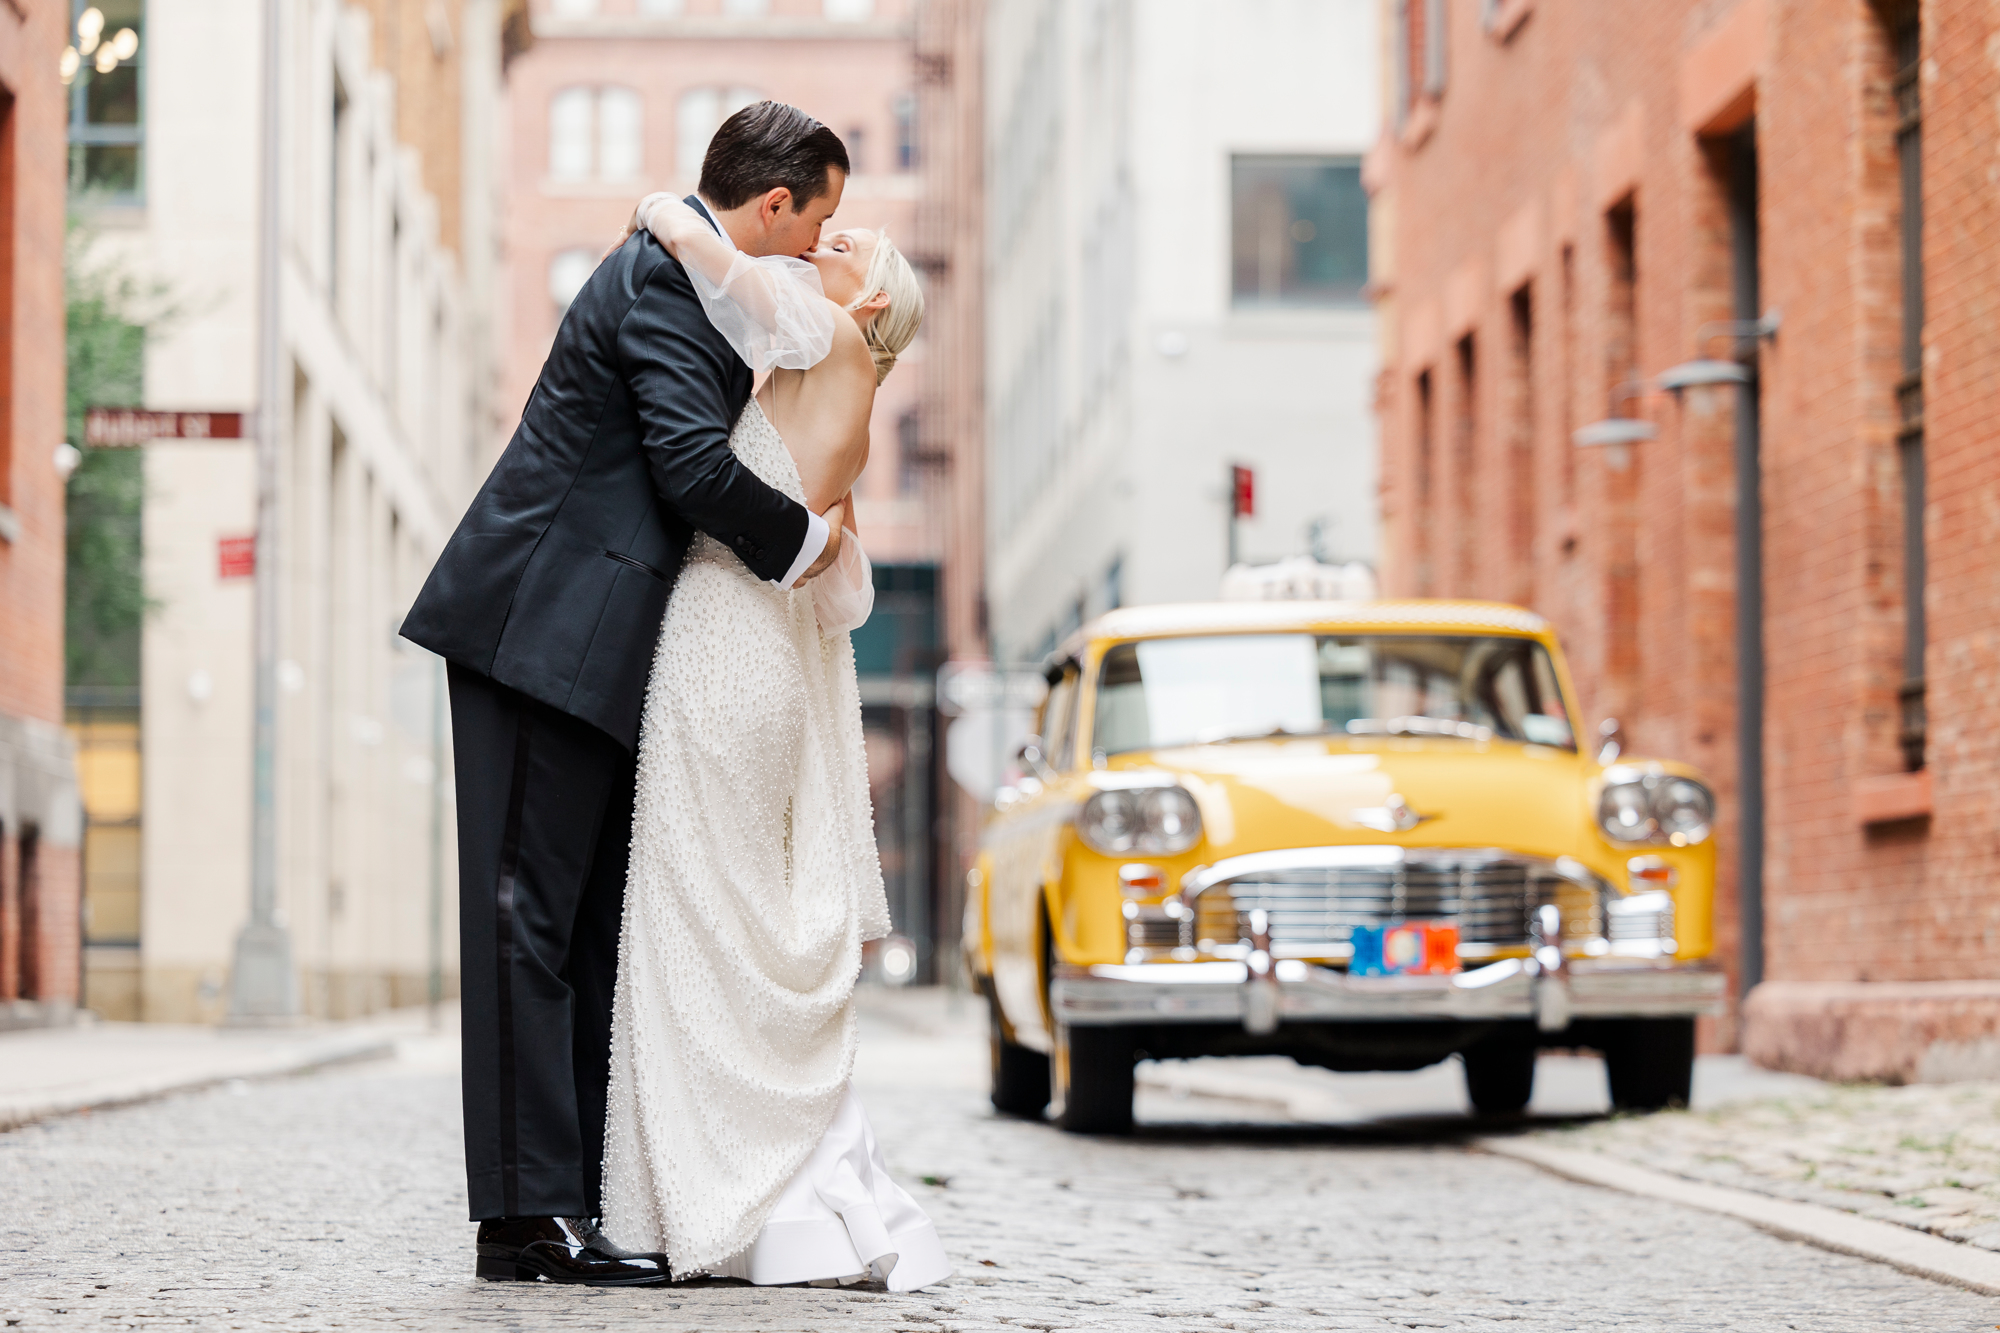 Personal Tribeca Rooftop Wedding Photos in NYC